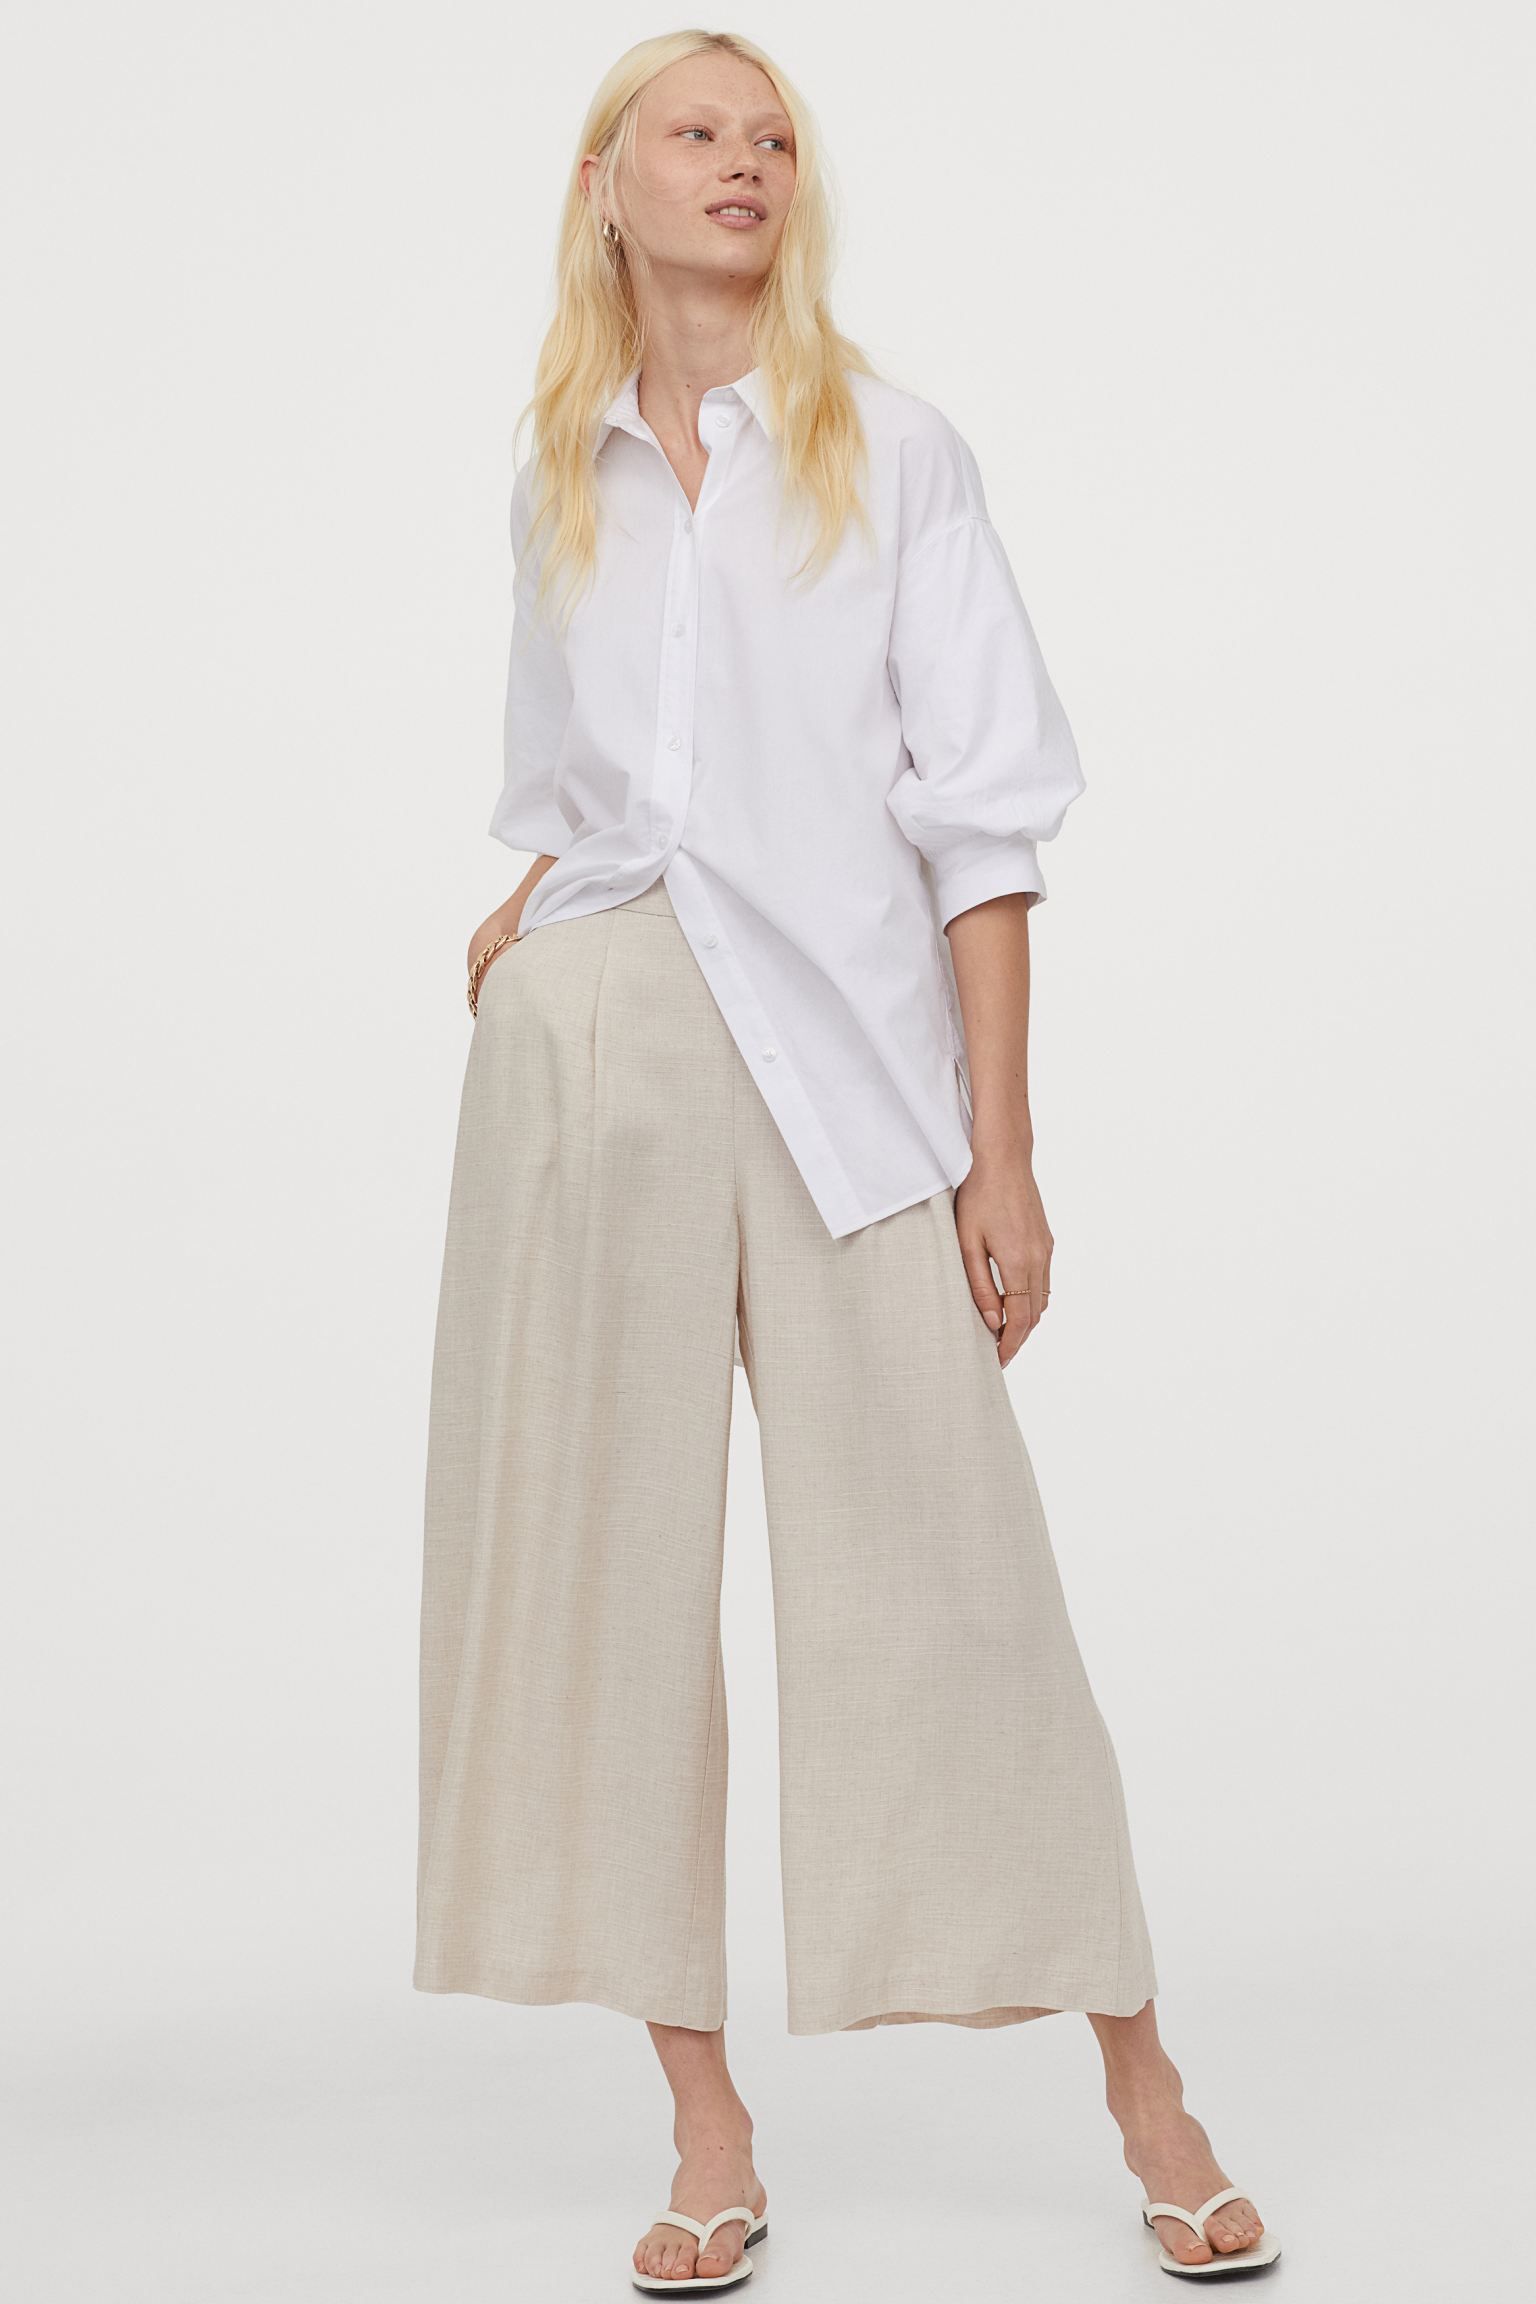 29 Pull-On Pants for Women That Are Chic and Comfortable | Who What Wear